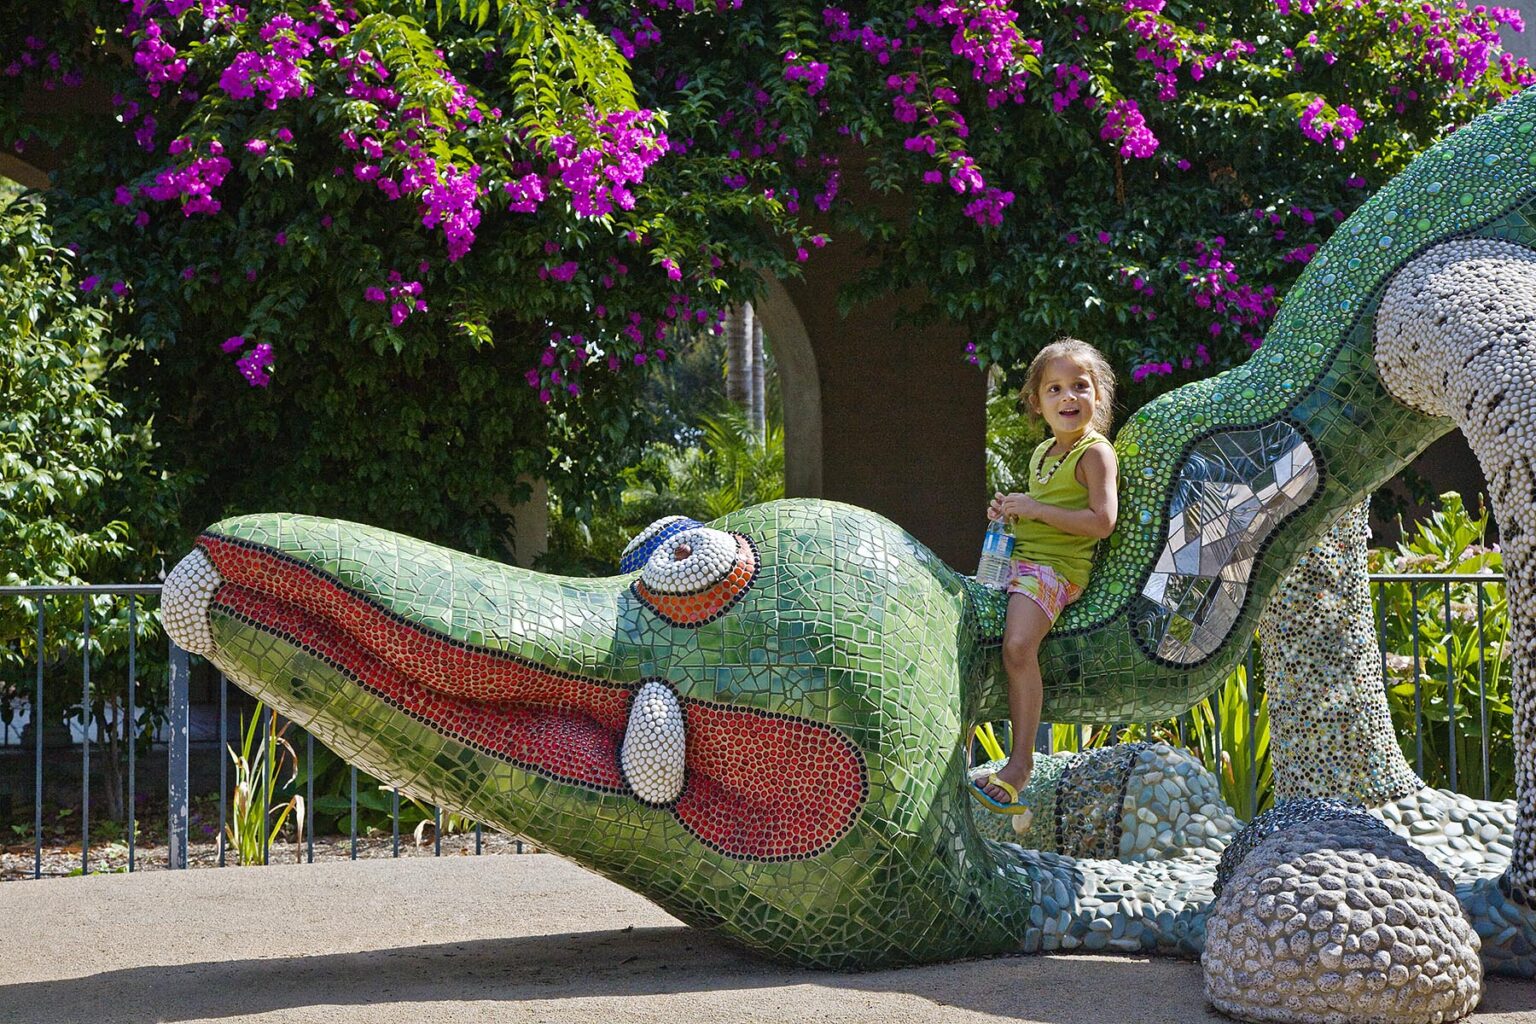 A young girl on a DRAGON SCULPTURE in front of the MINGEI INTERNATIONAL MUSEUM is located in BALBOA PARK SAN DIEGO, CALIFORNIA